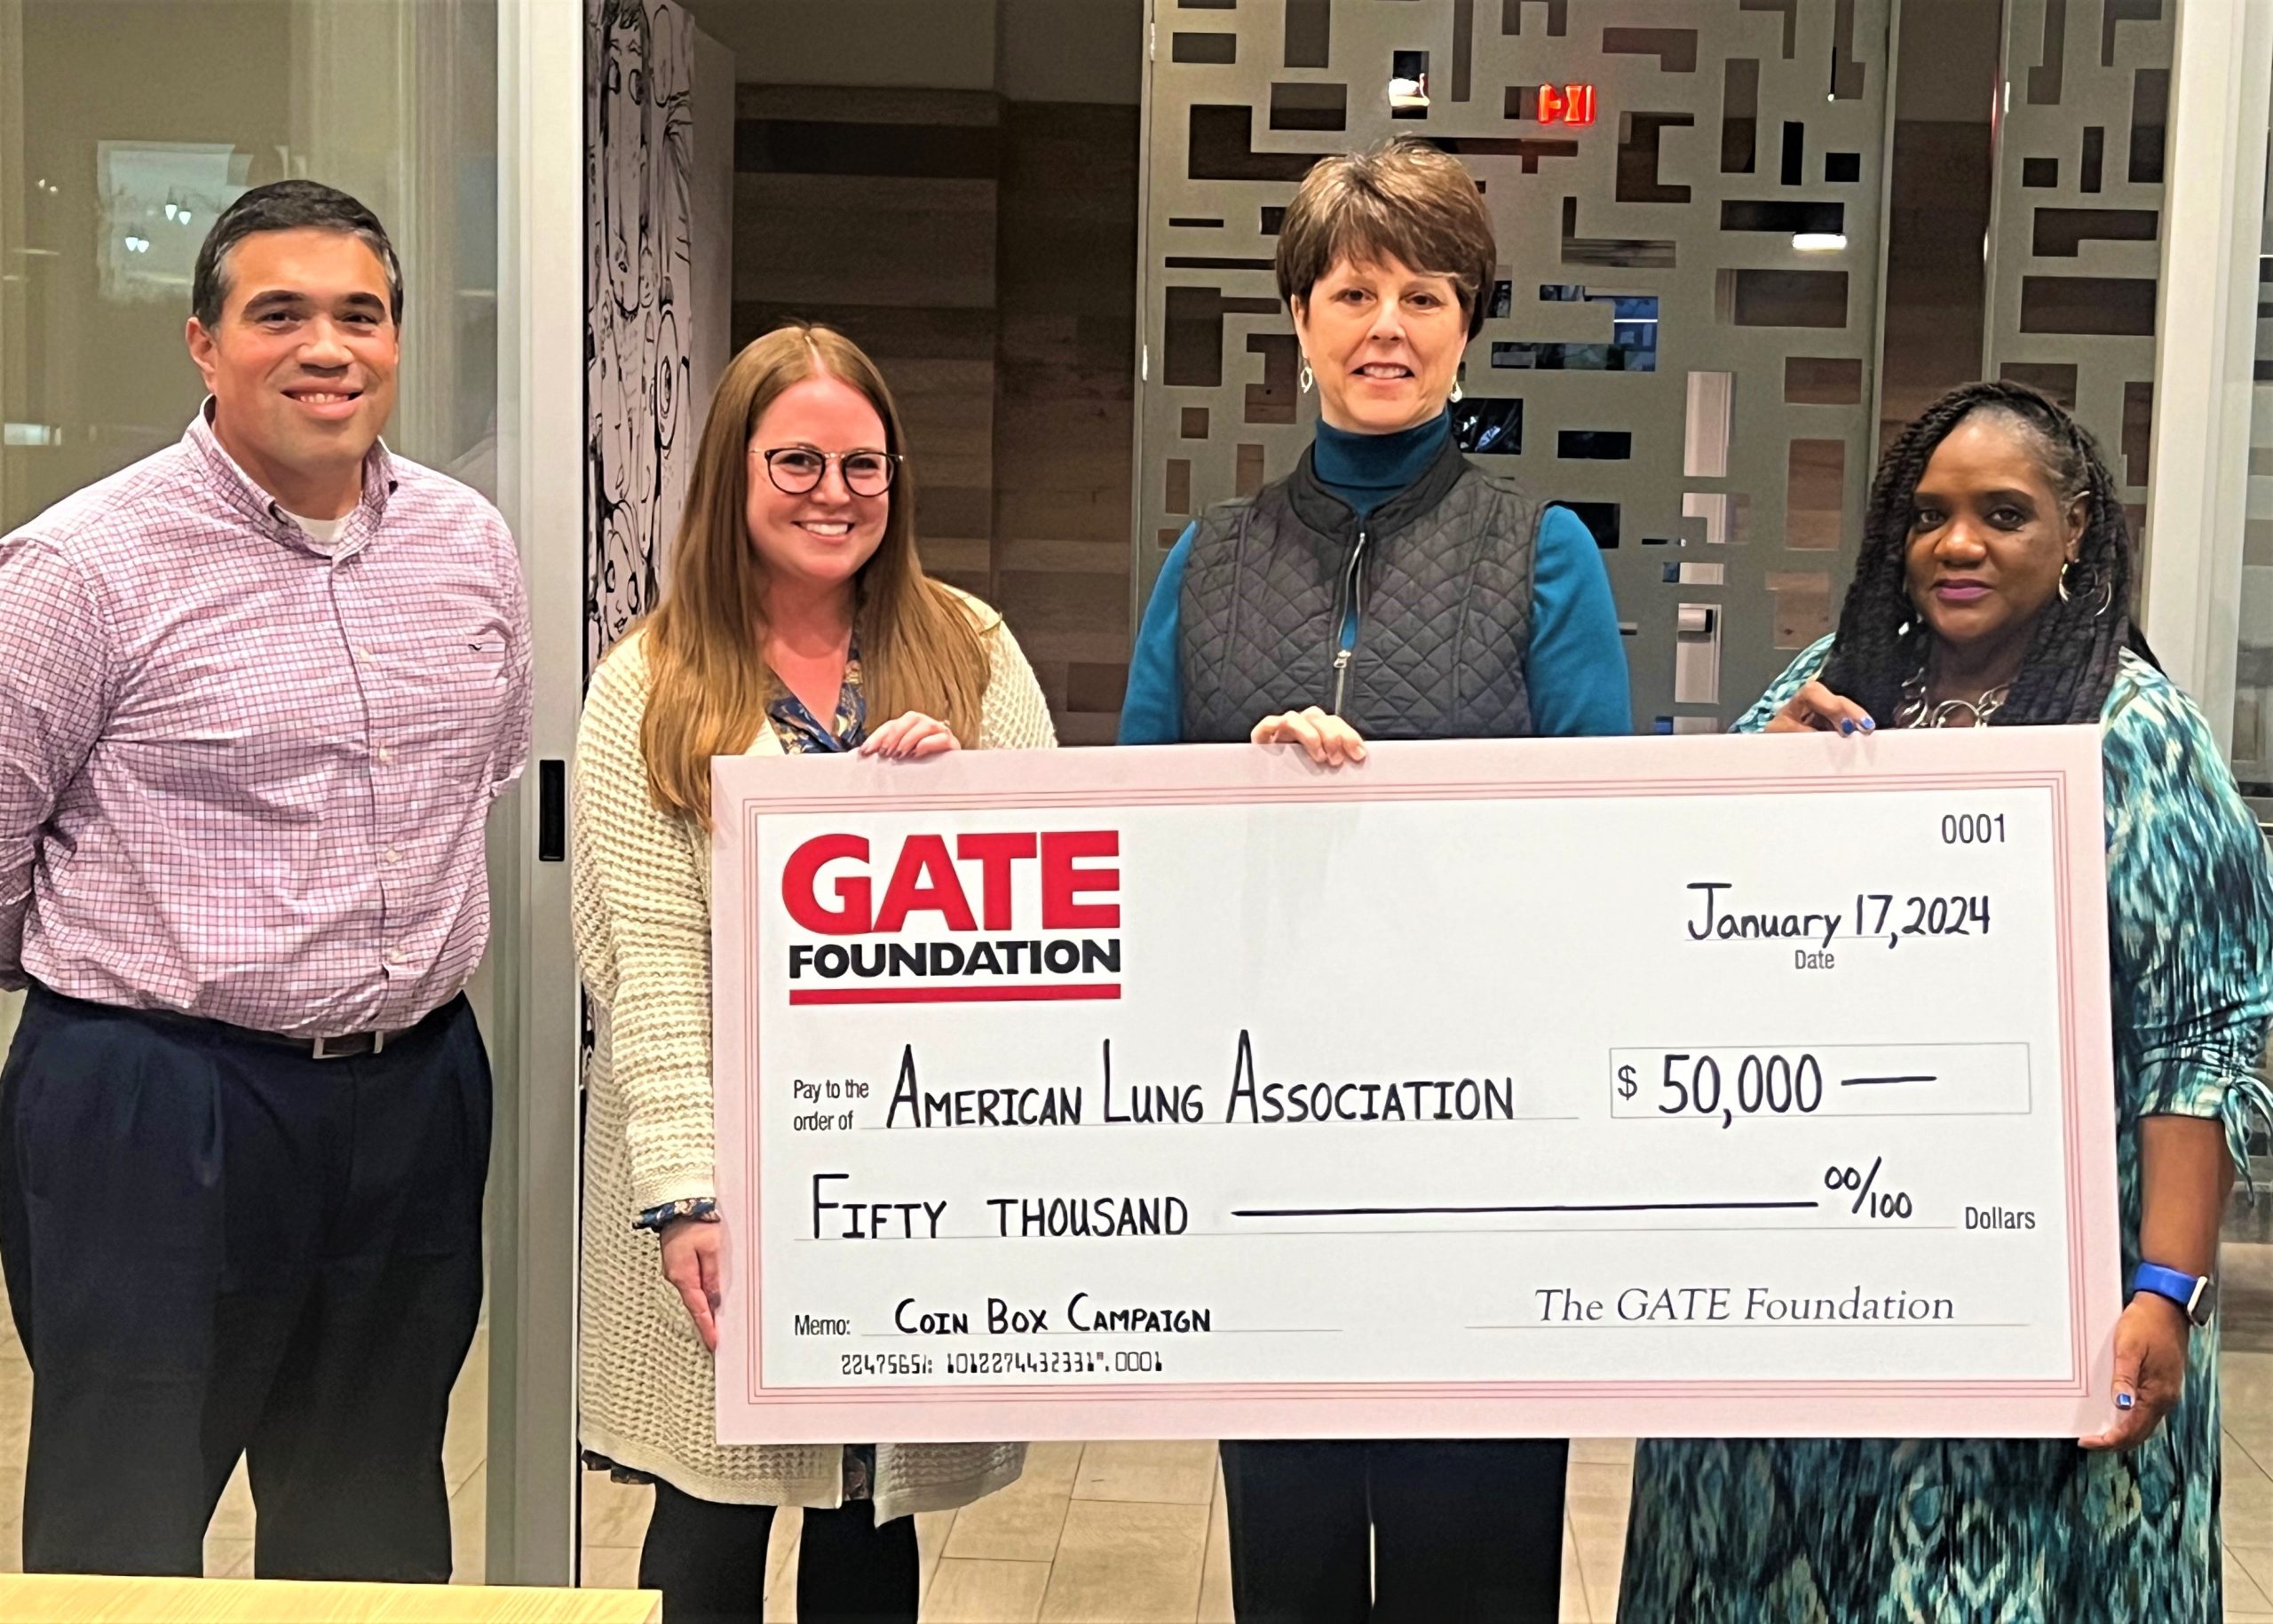 THE GATE FOUNDATION RAISES $50,000 FOR AMERICAN LUNG ASSOCIATION